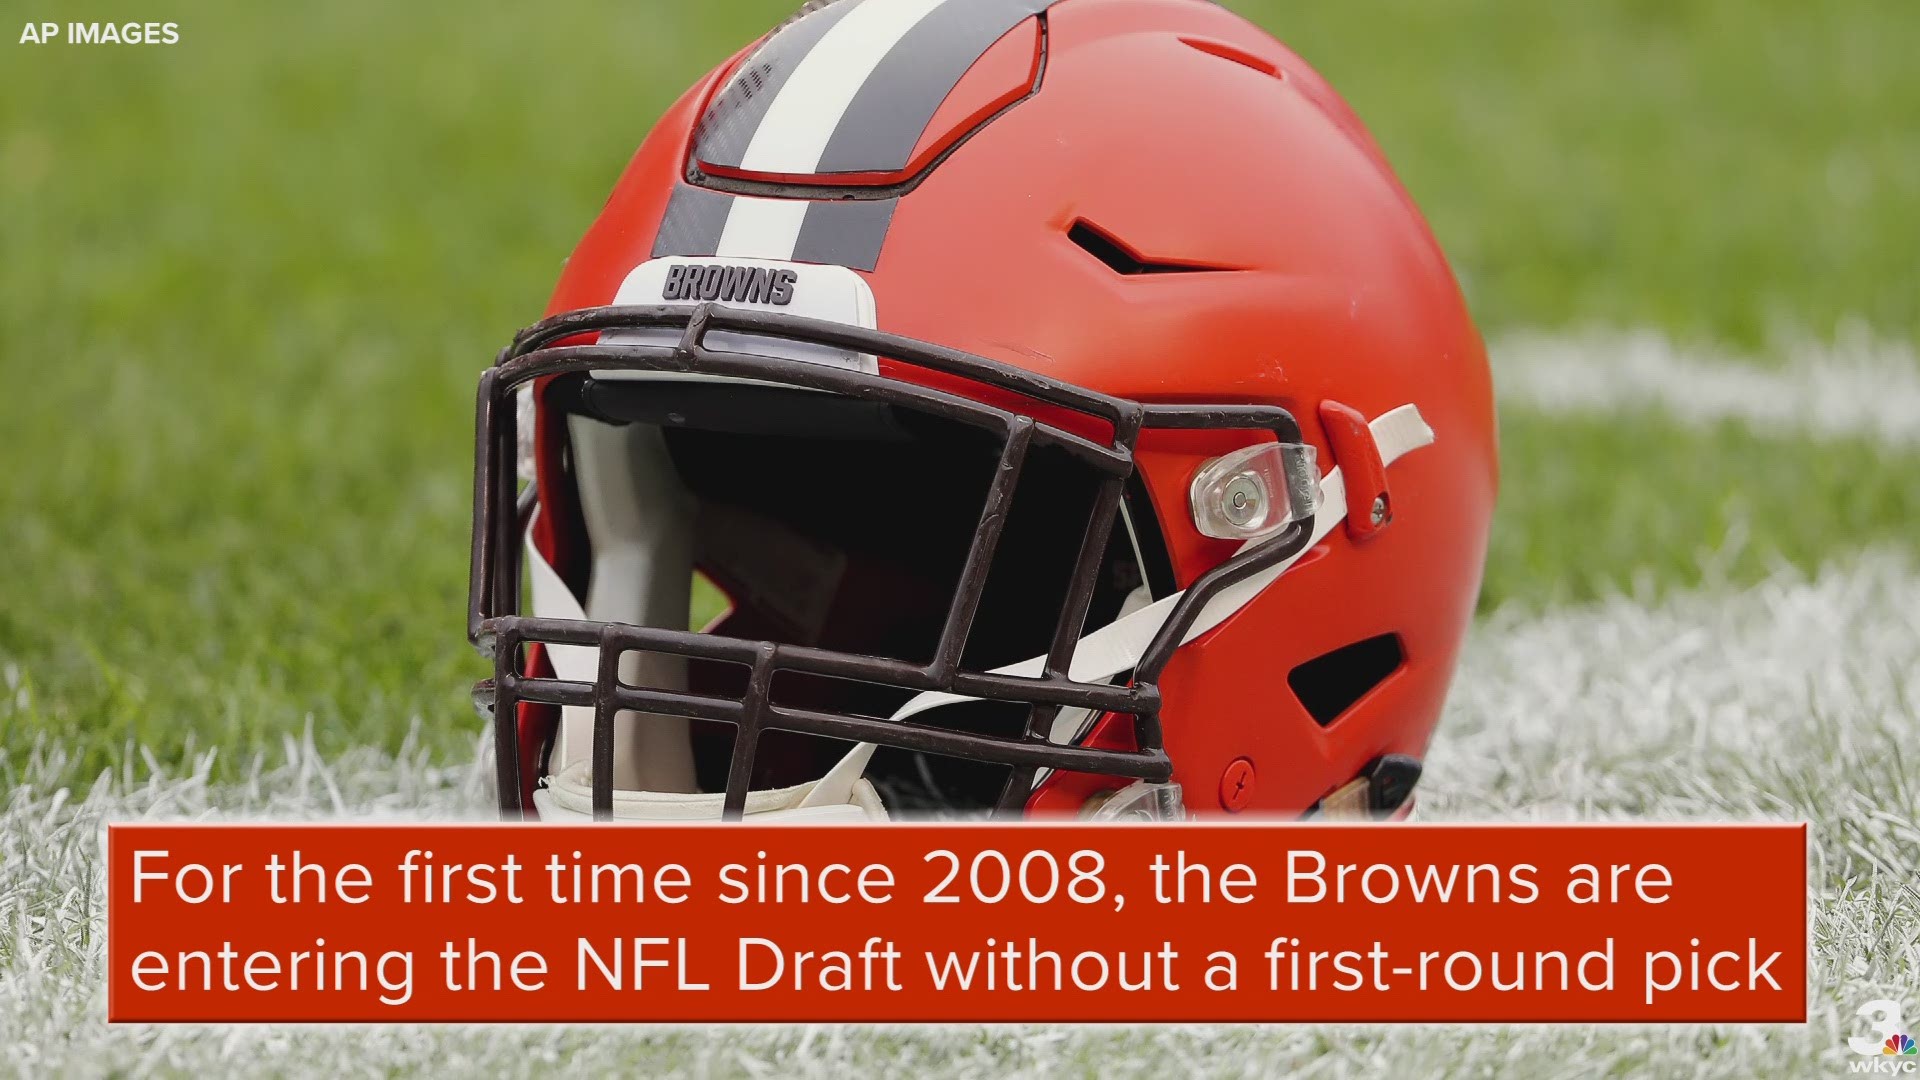 During an appearance on Adam Schefter's podcast, Cleveland Browns general manager John Dorsey revealed his team is considering acquiring a first-round pick in the 2019 NFL Draft.